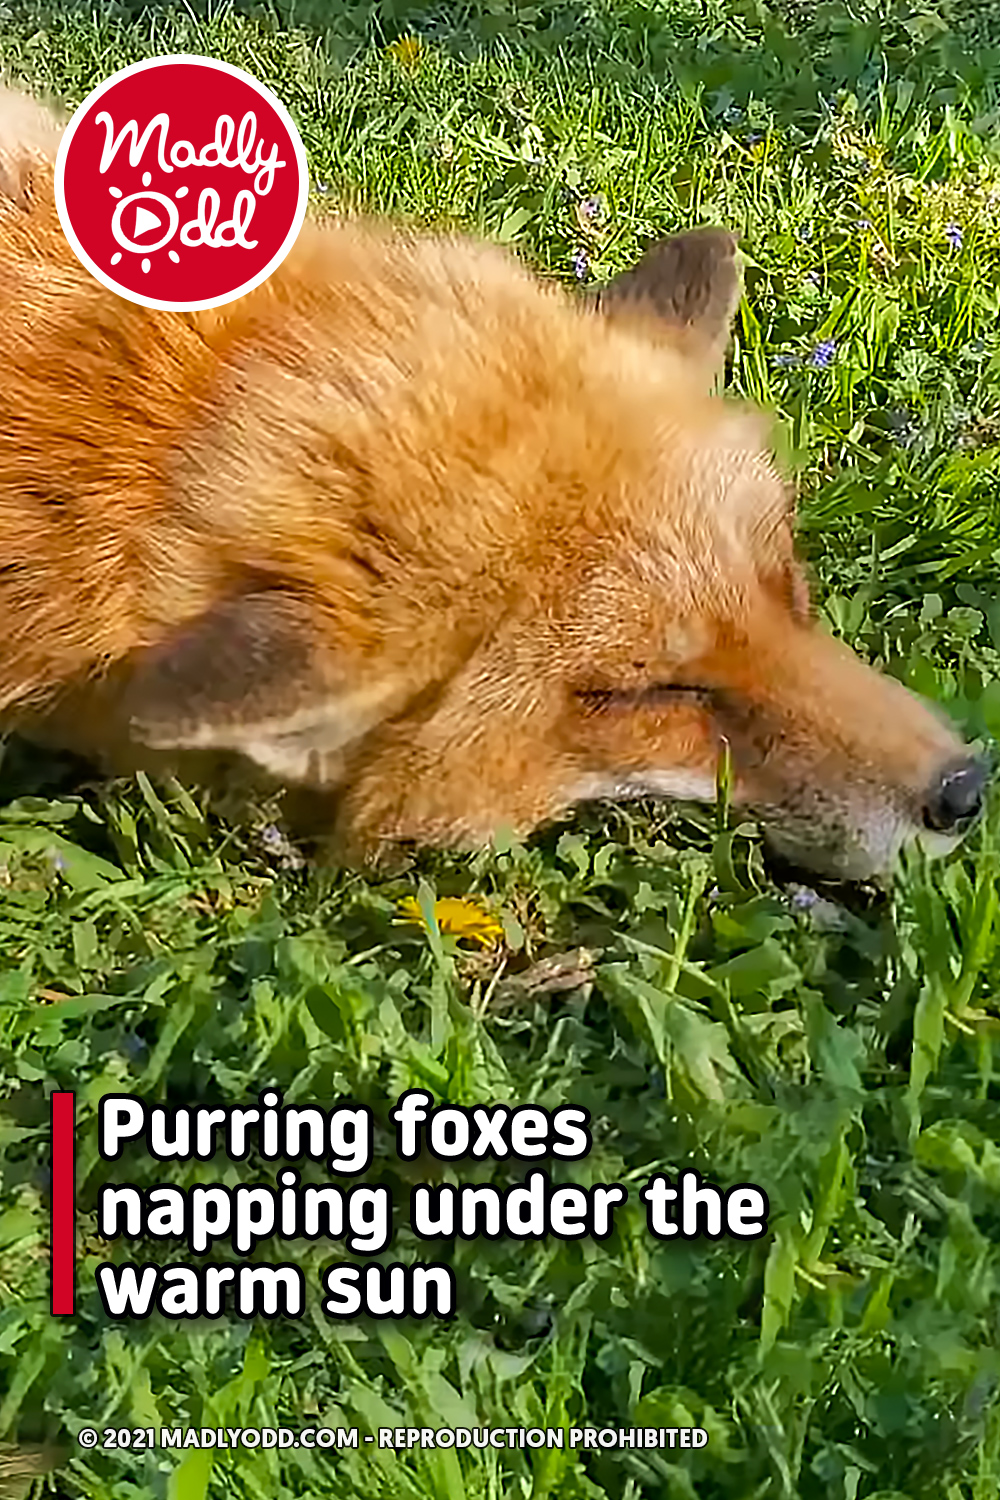 Purring foxes napping under the warm sun